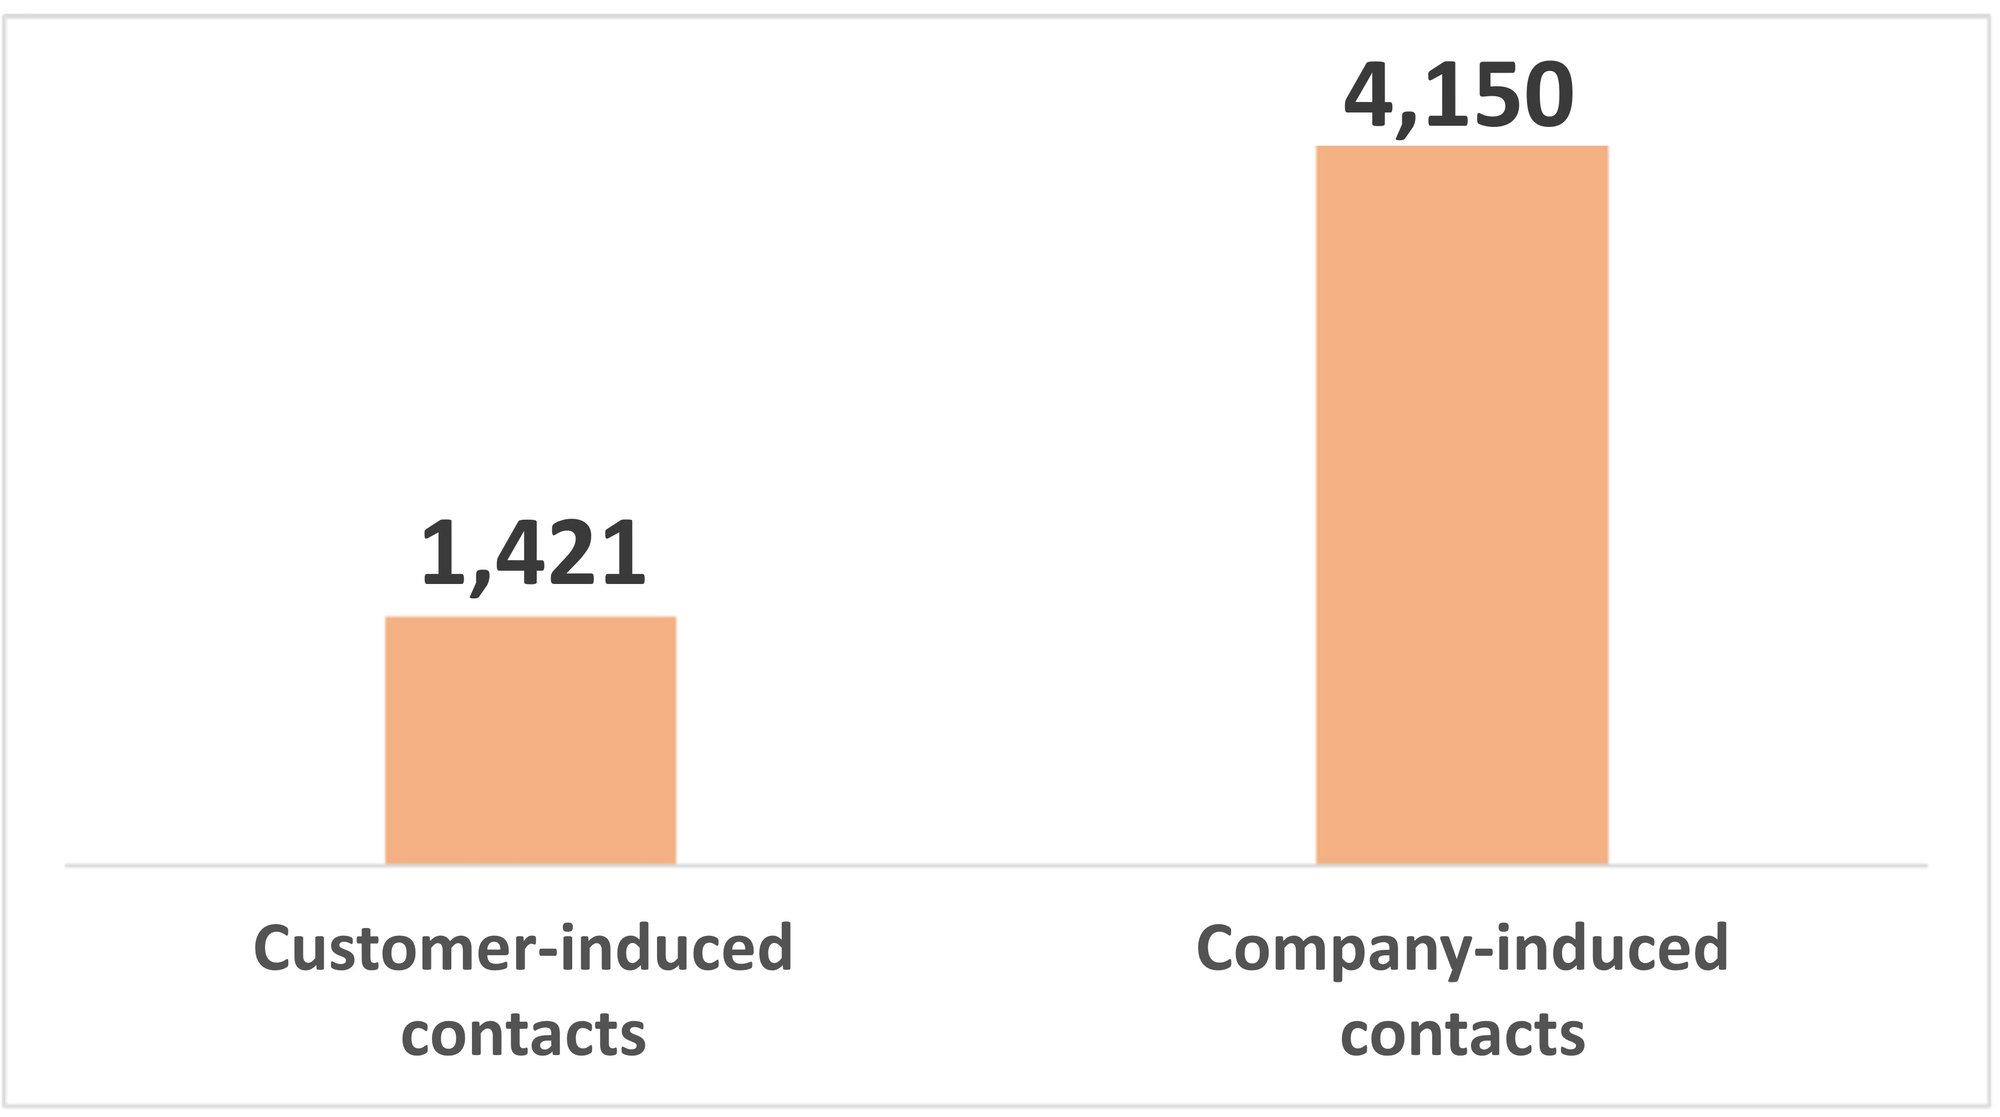 Bar chart of an analysis at an energy supplier: Bar 1: Customer-induced contacts 1421, Bar 2: Company-induced contacts 4150